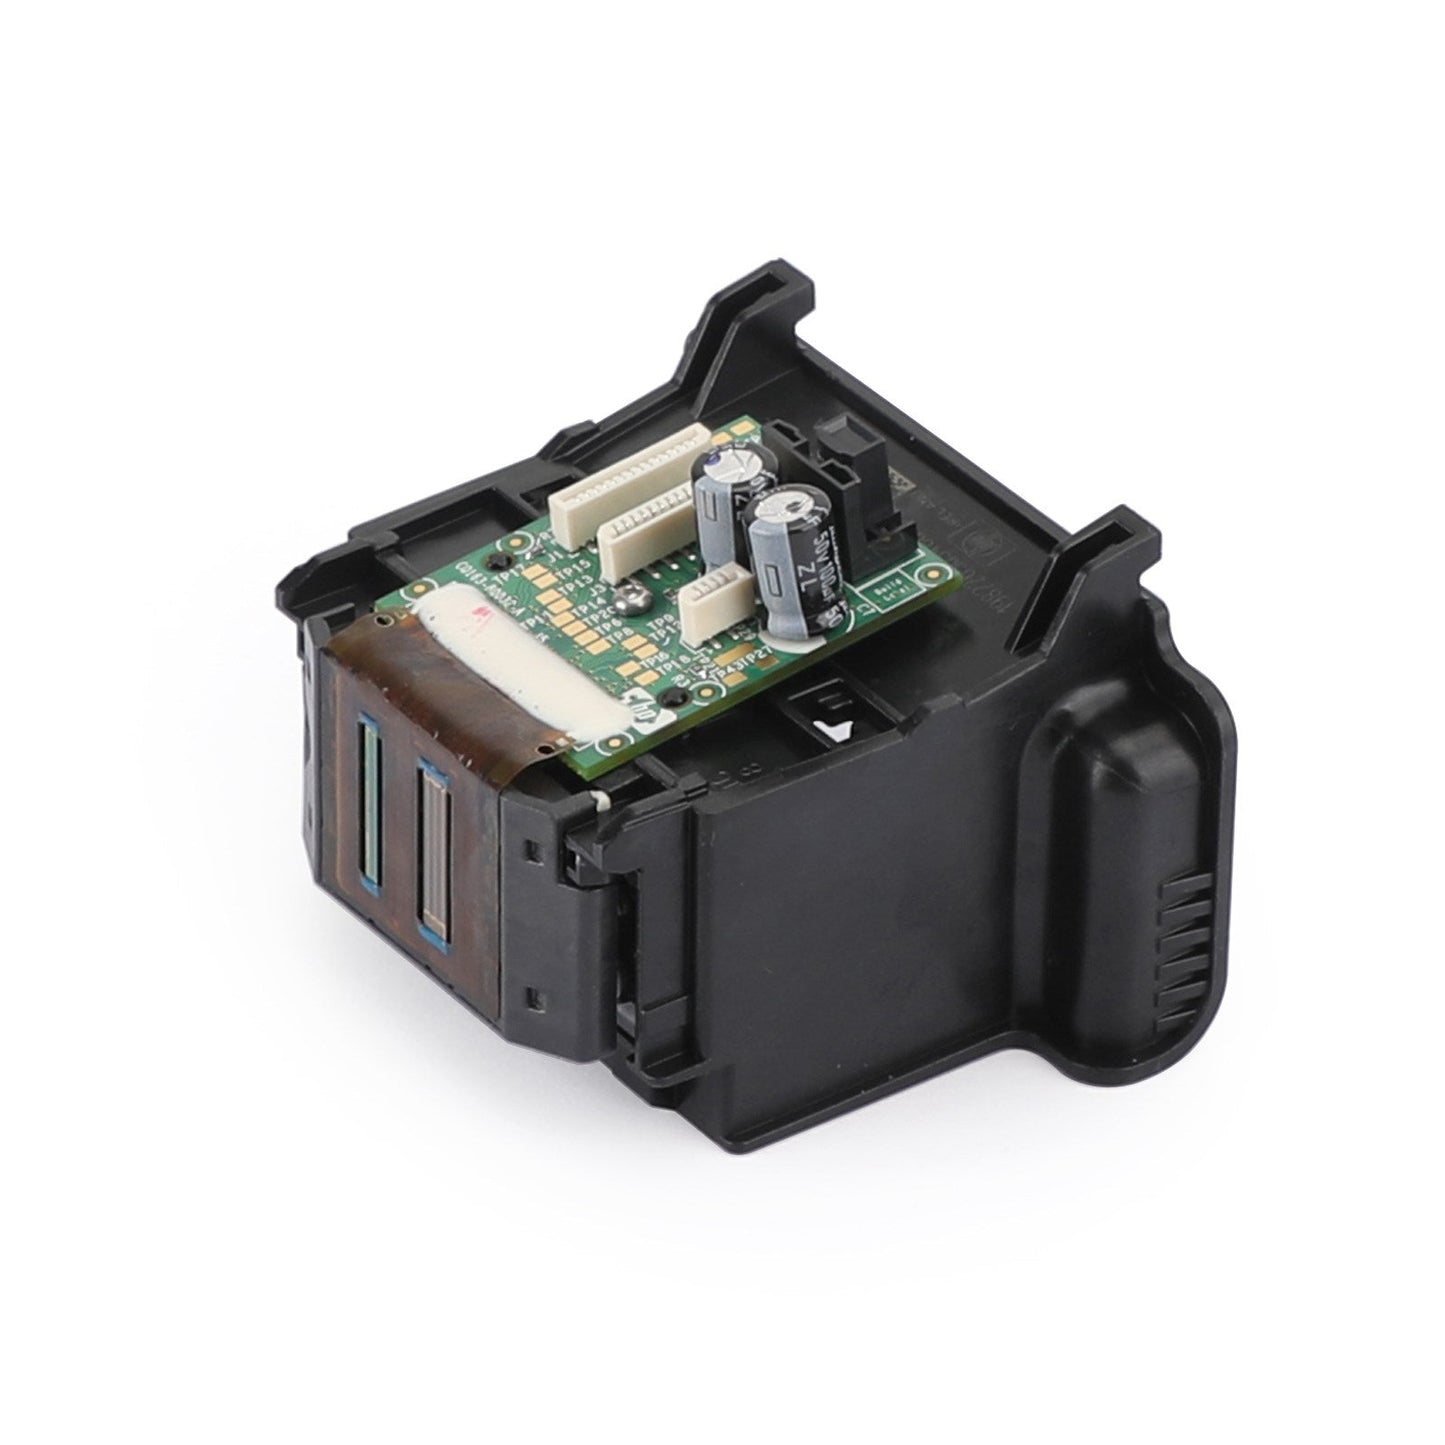 Replacement Printer Print Head CN688A Fit for HP 3070 3520 5525 4620 5520 5510